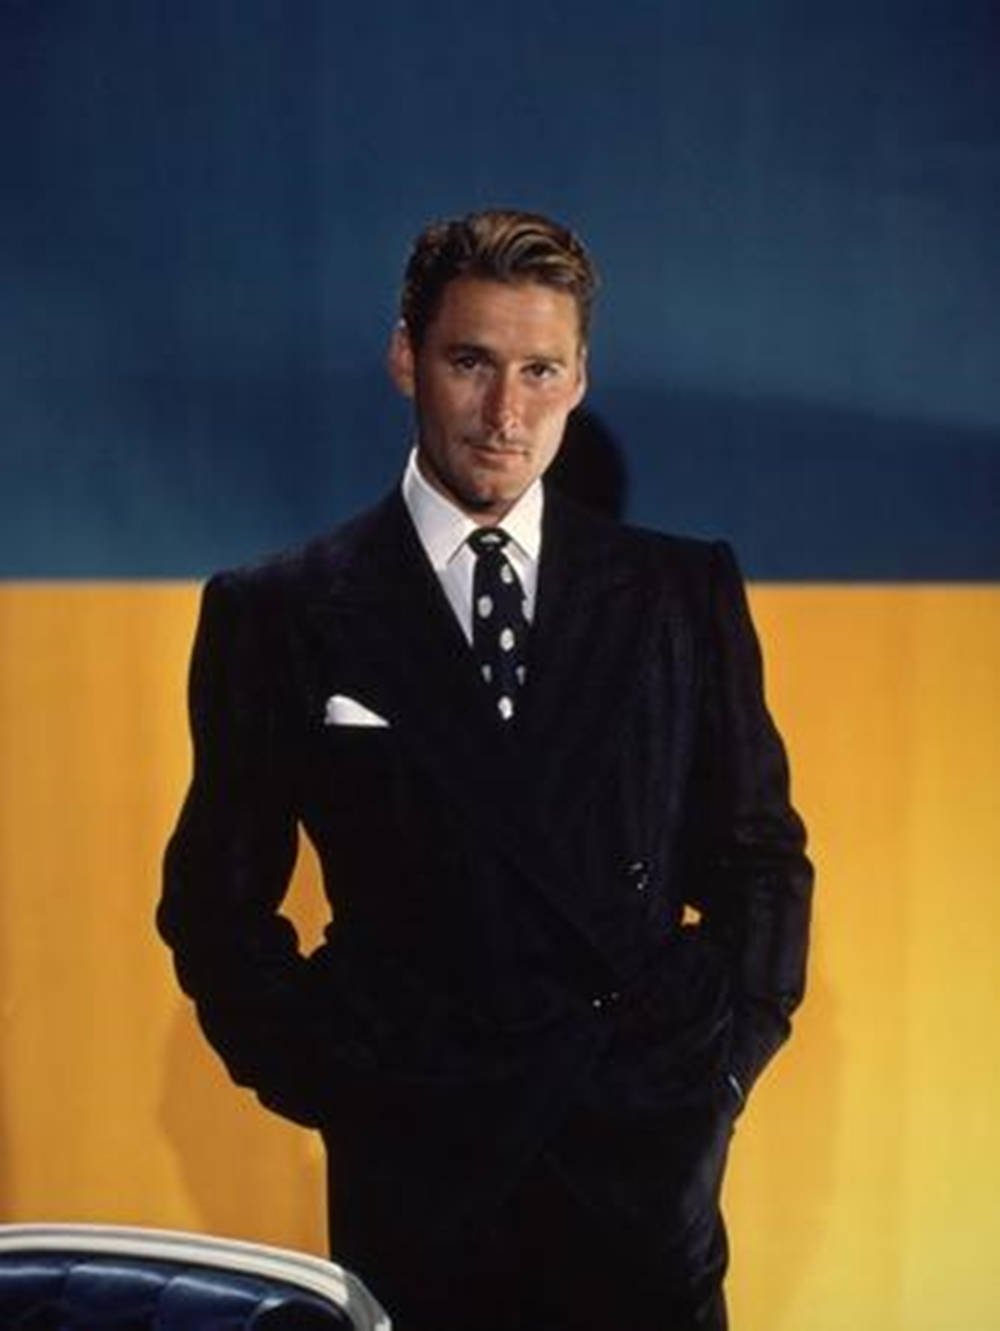 Download Errol Flynn In Suit Blue And Yellow Background Wallpaper ...